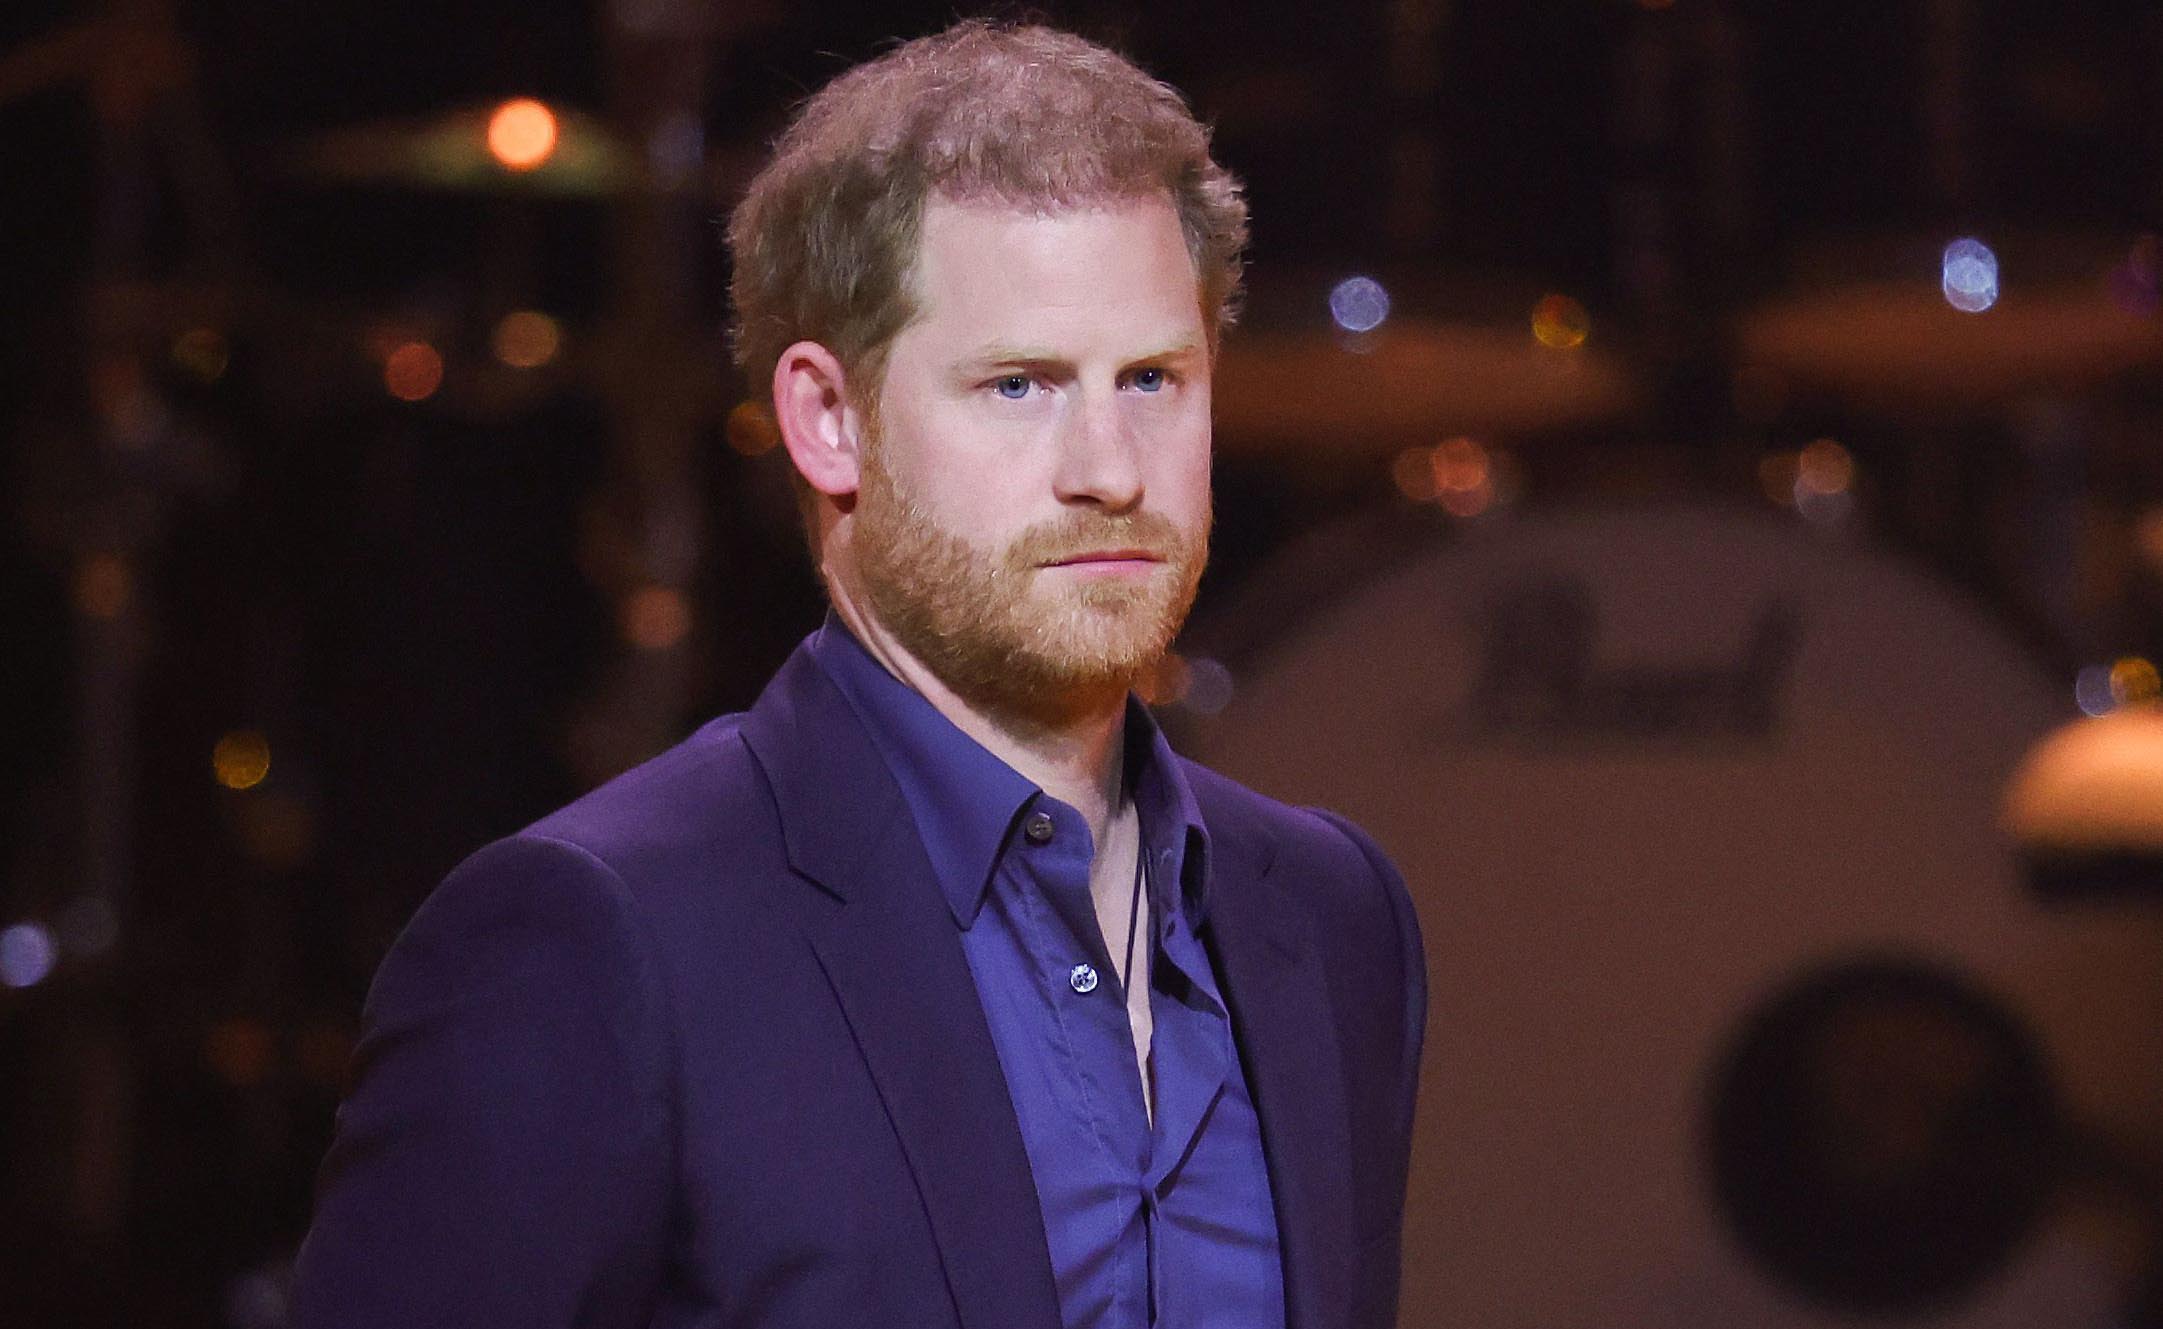 Everything we know about Prince Harry’s controversial memoir, from royal secrets to the release date and possible fallout